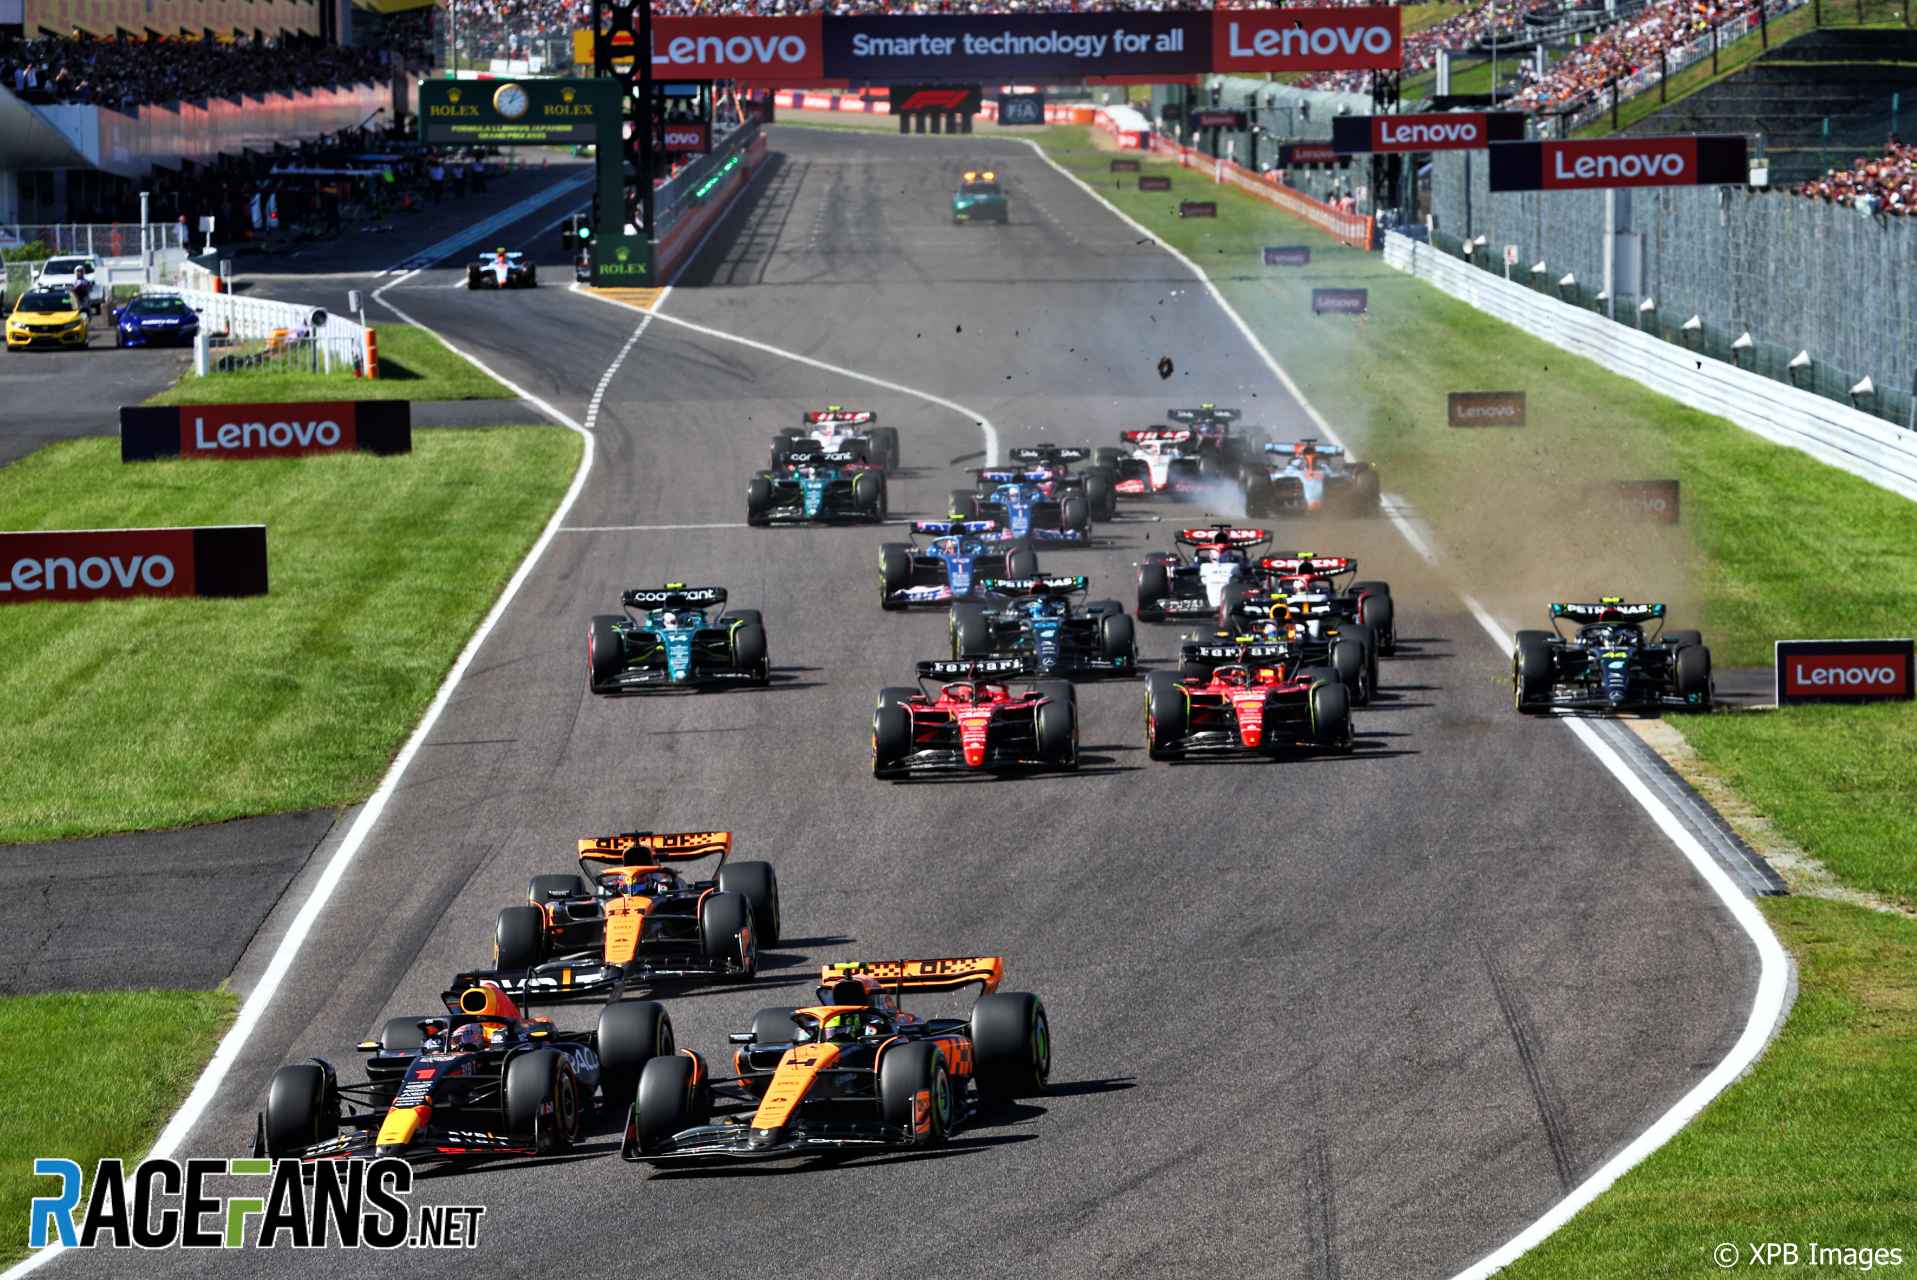 The 2023 Japanese Grand Prix was held at Suzuka and won by Max Verstappen